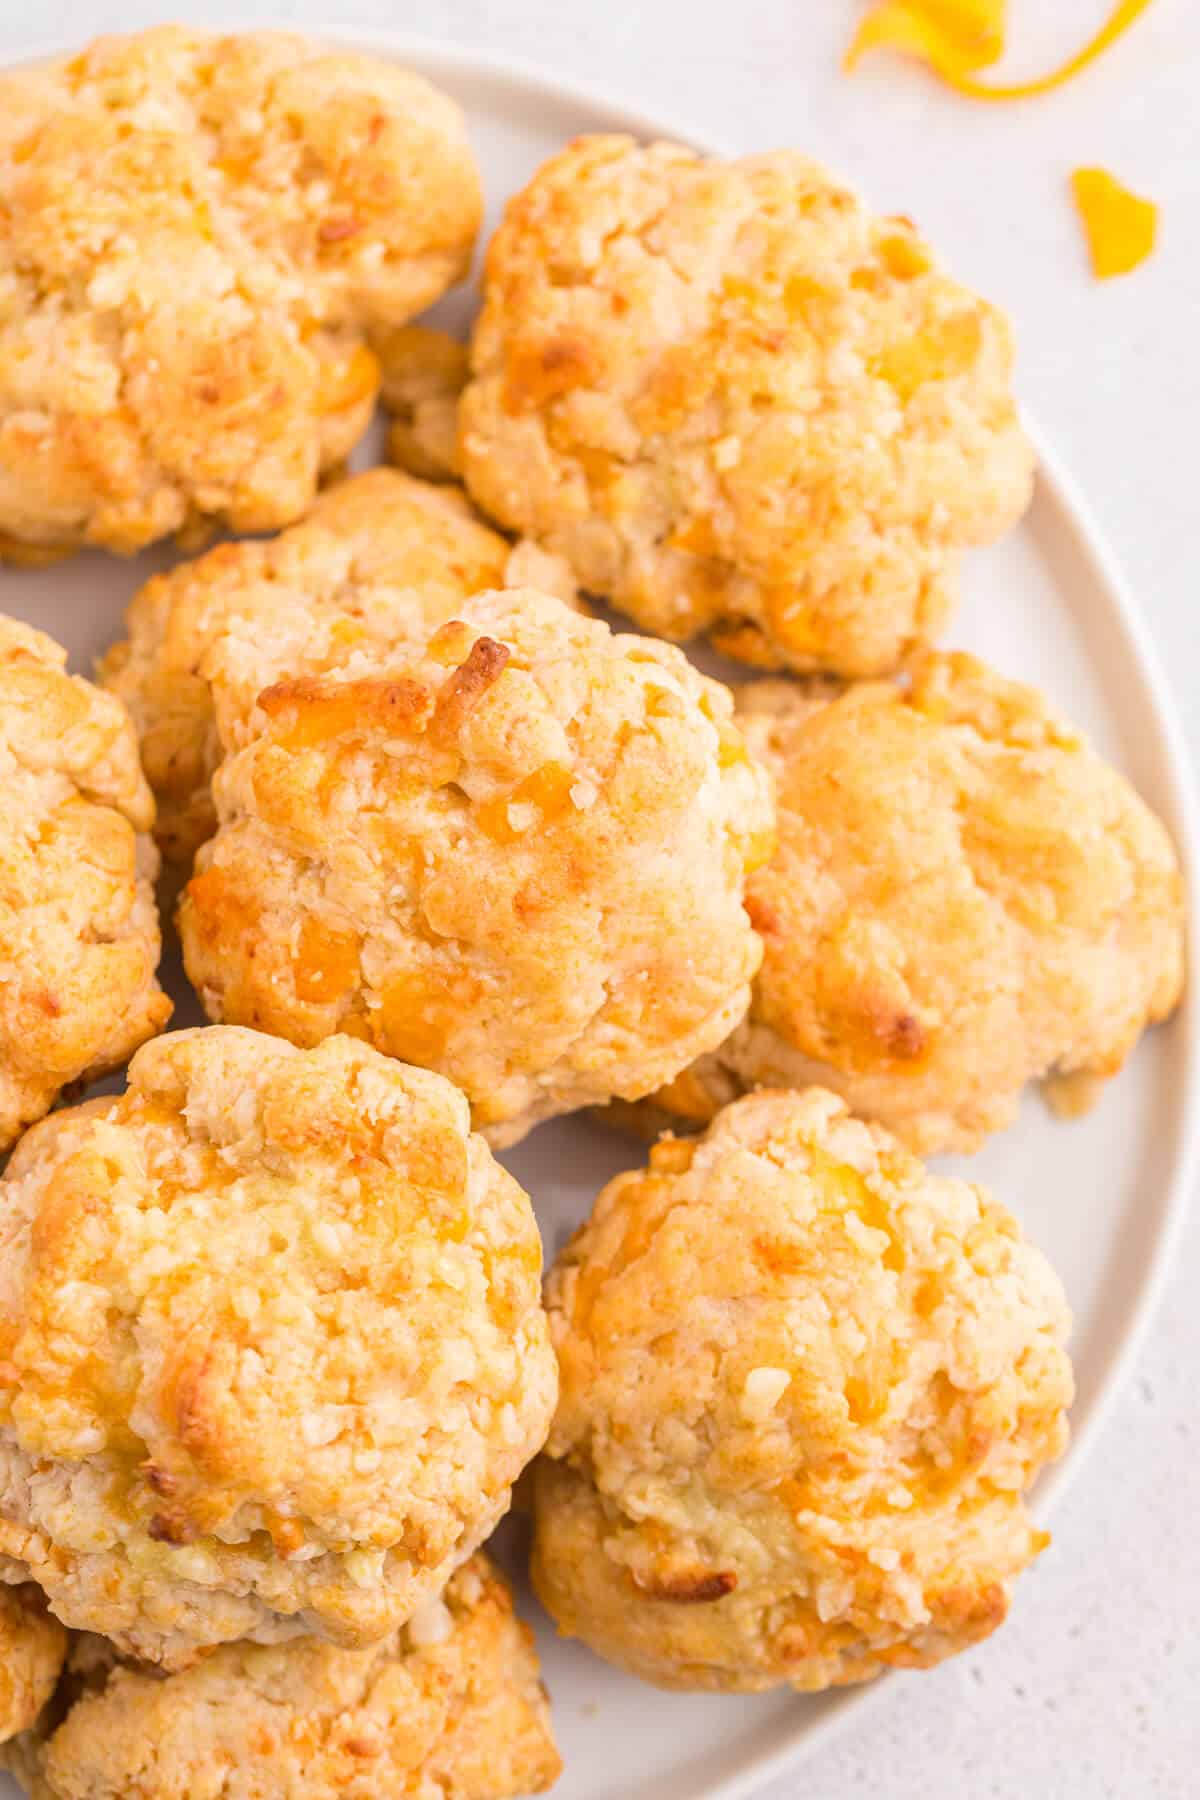 Cheesy garlic biscuits on a plate.